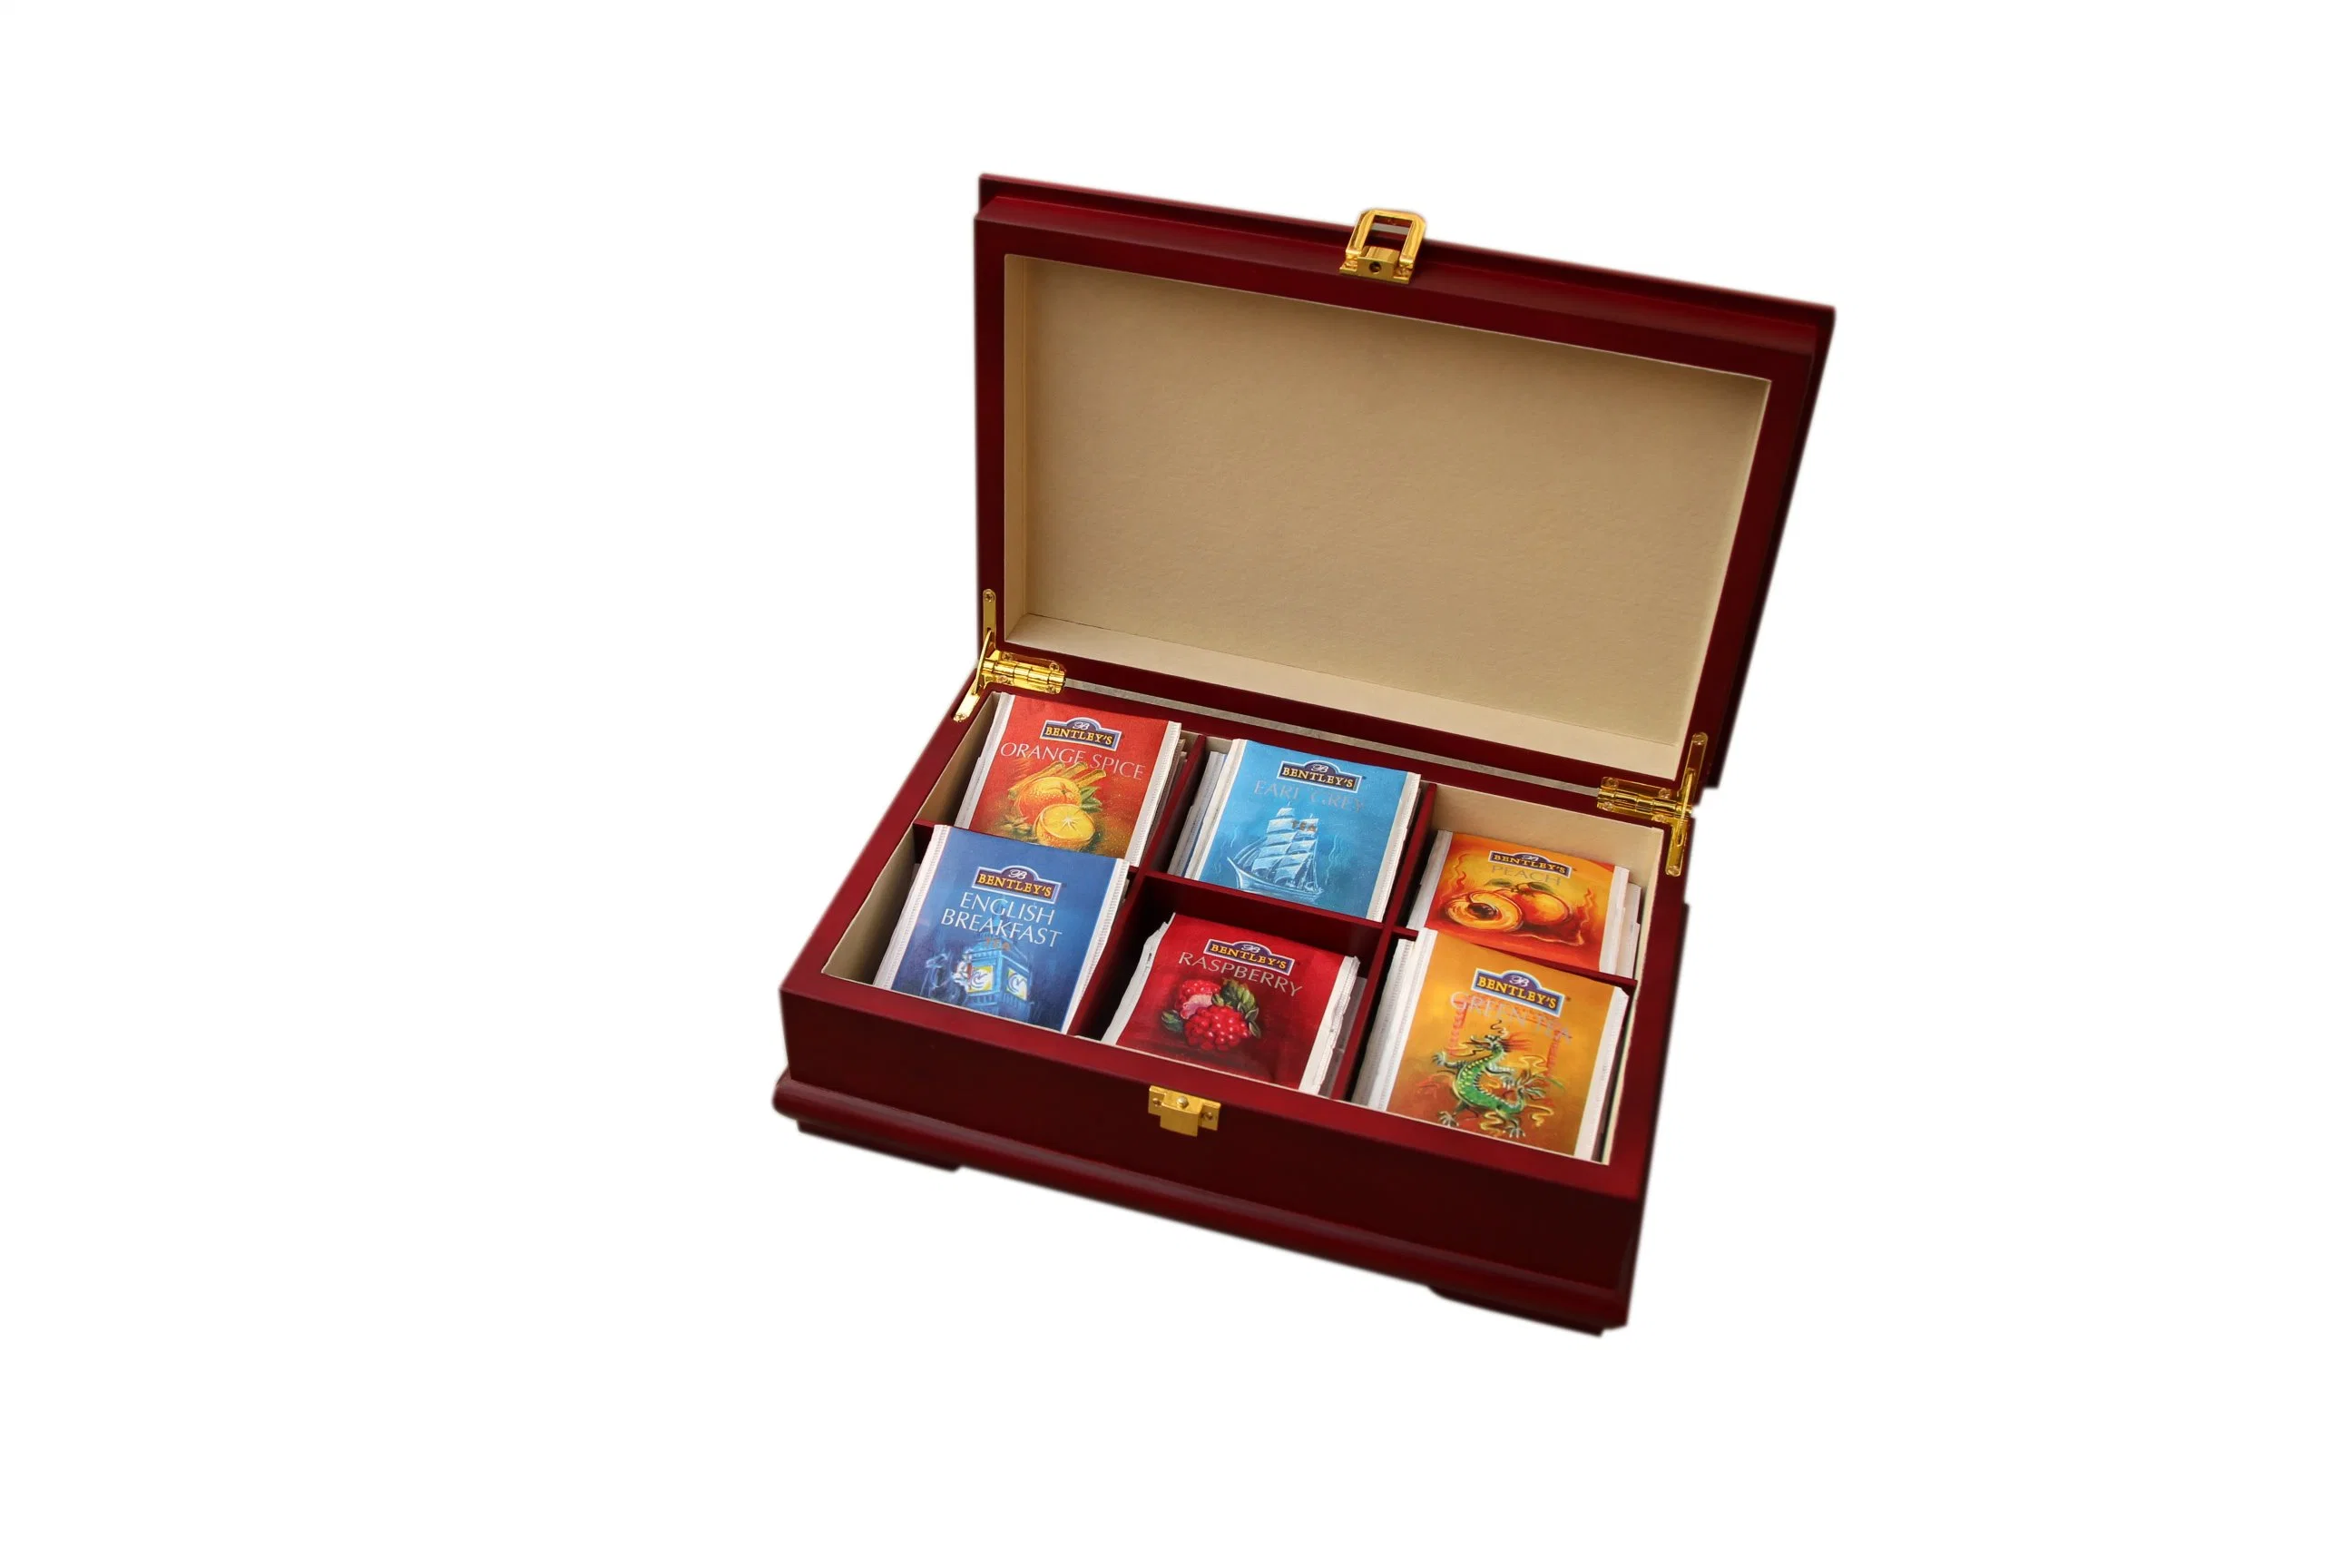 Newly Beautifully Handcrafted Rich Mahogany Wooden Tea Bag Compartment Boxes, Wooden Tea Gift Box, Tea Storage Box and Organizer Manufacturer and Wholesale/Supplierr